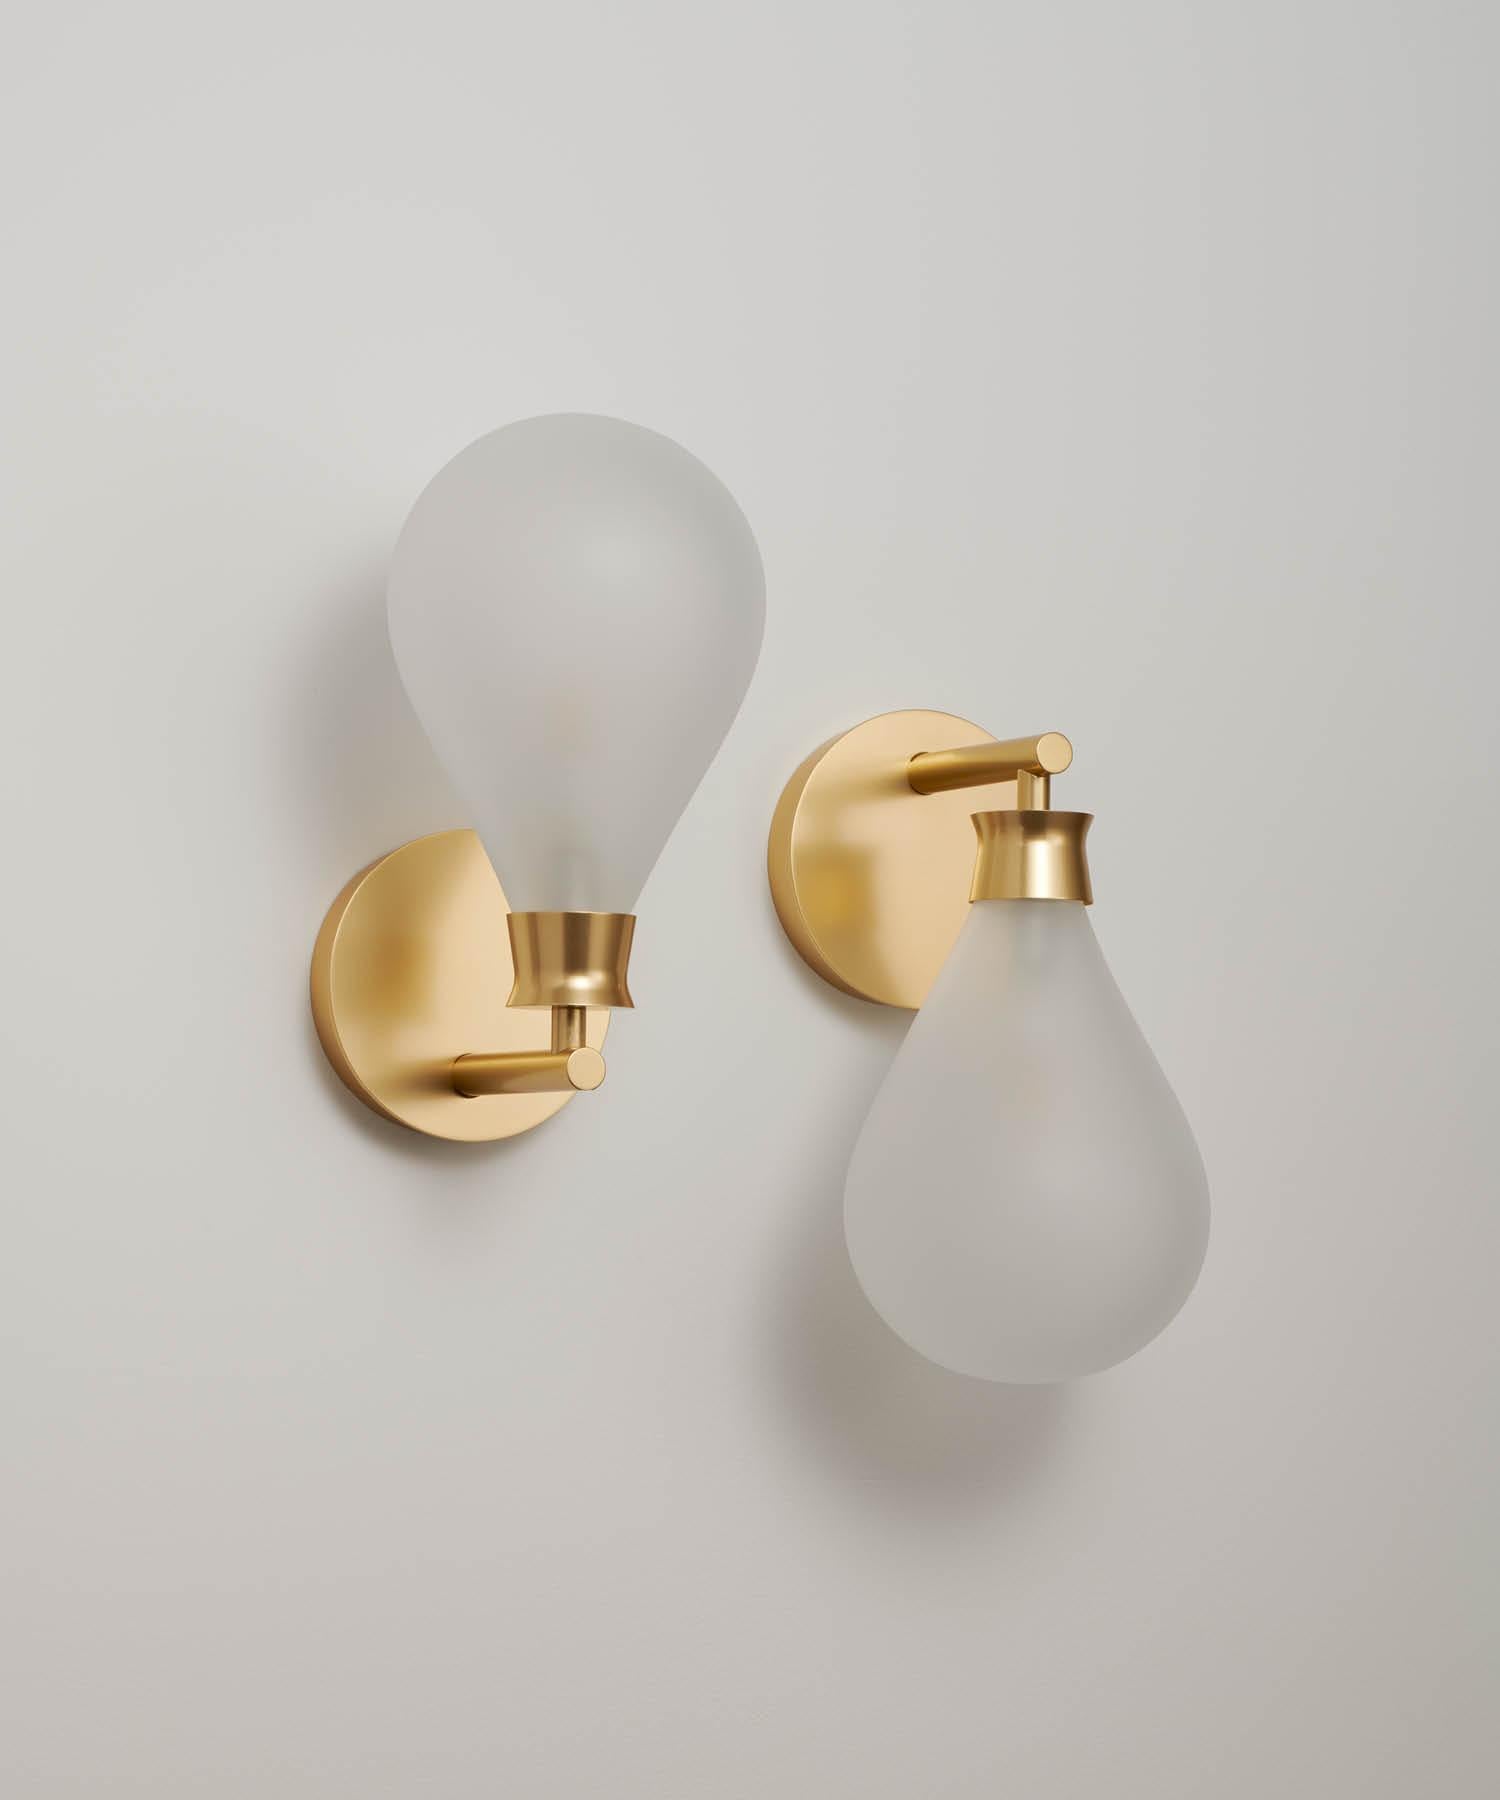 Aluminum Cintola Wall Light in Polished Aluminium with Frosted Handblown Glass Globe For Sale